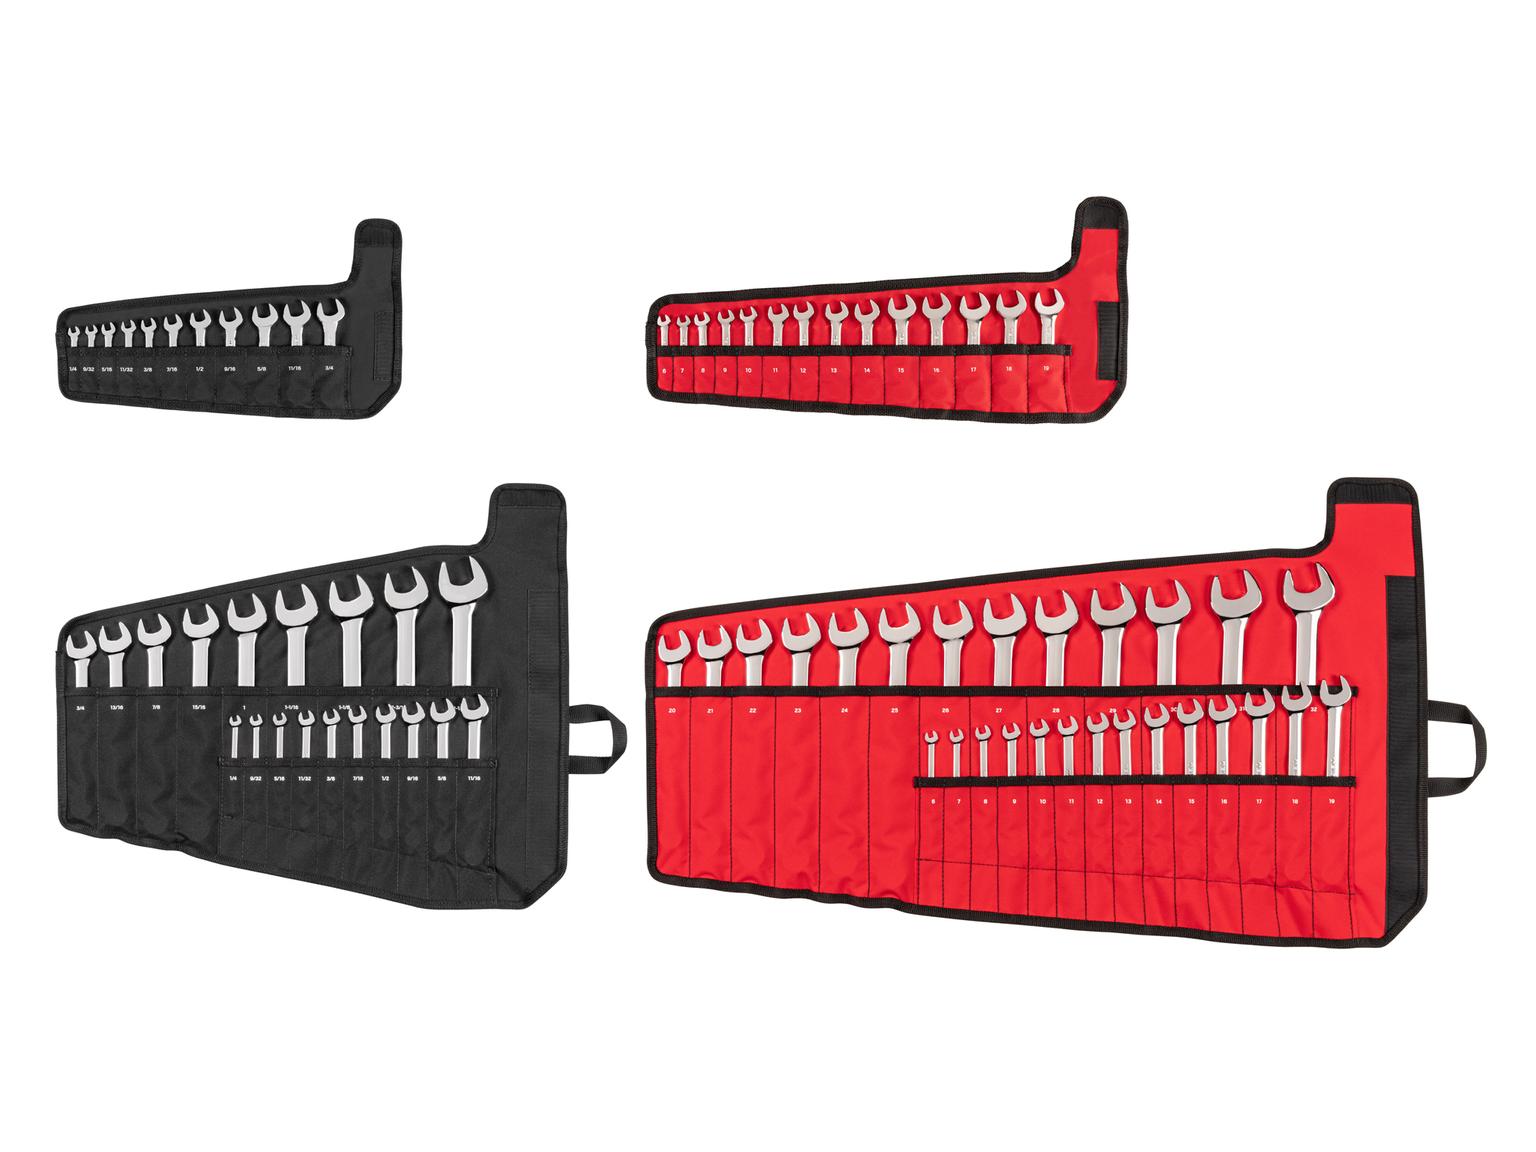 TEKTON WCB94903-T Stubby and Standard Length Combination Wrench Set with Pouch, 71-Piece (1/4 - 1-1/4 in., 6 - 32 mm)